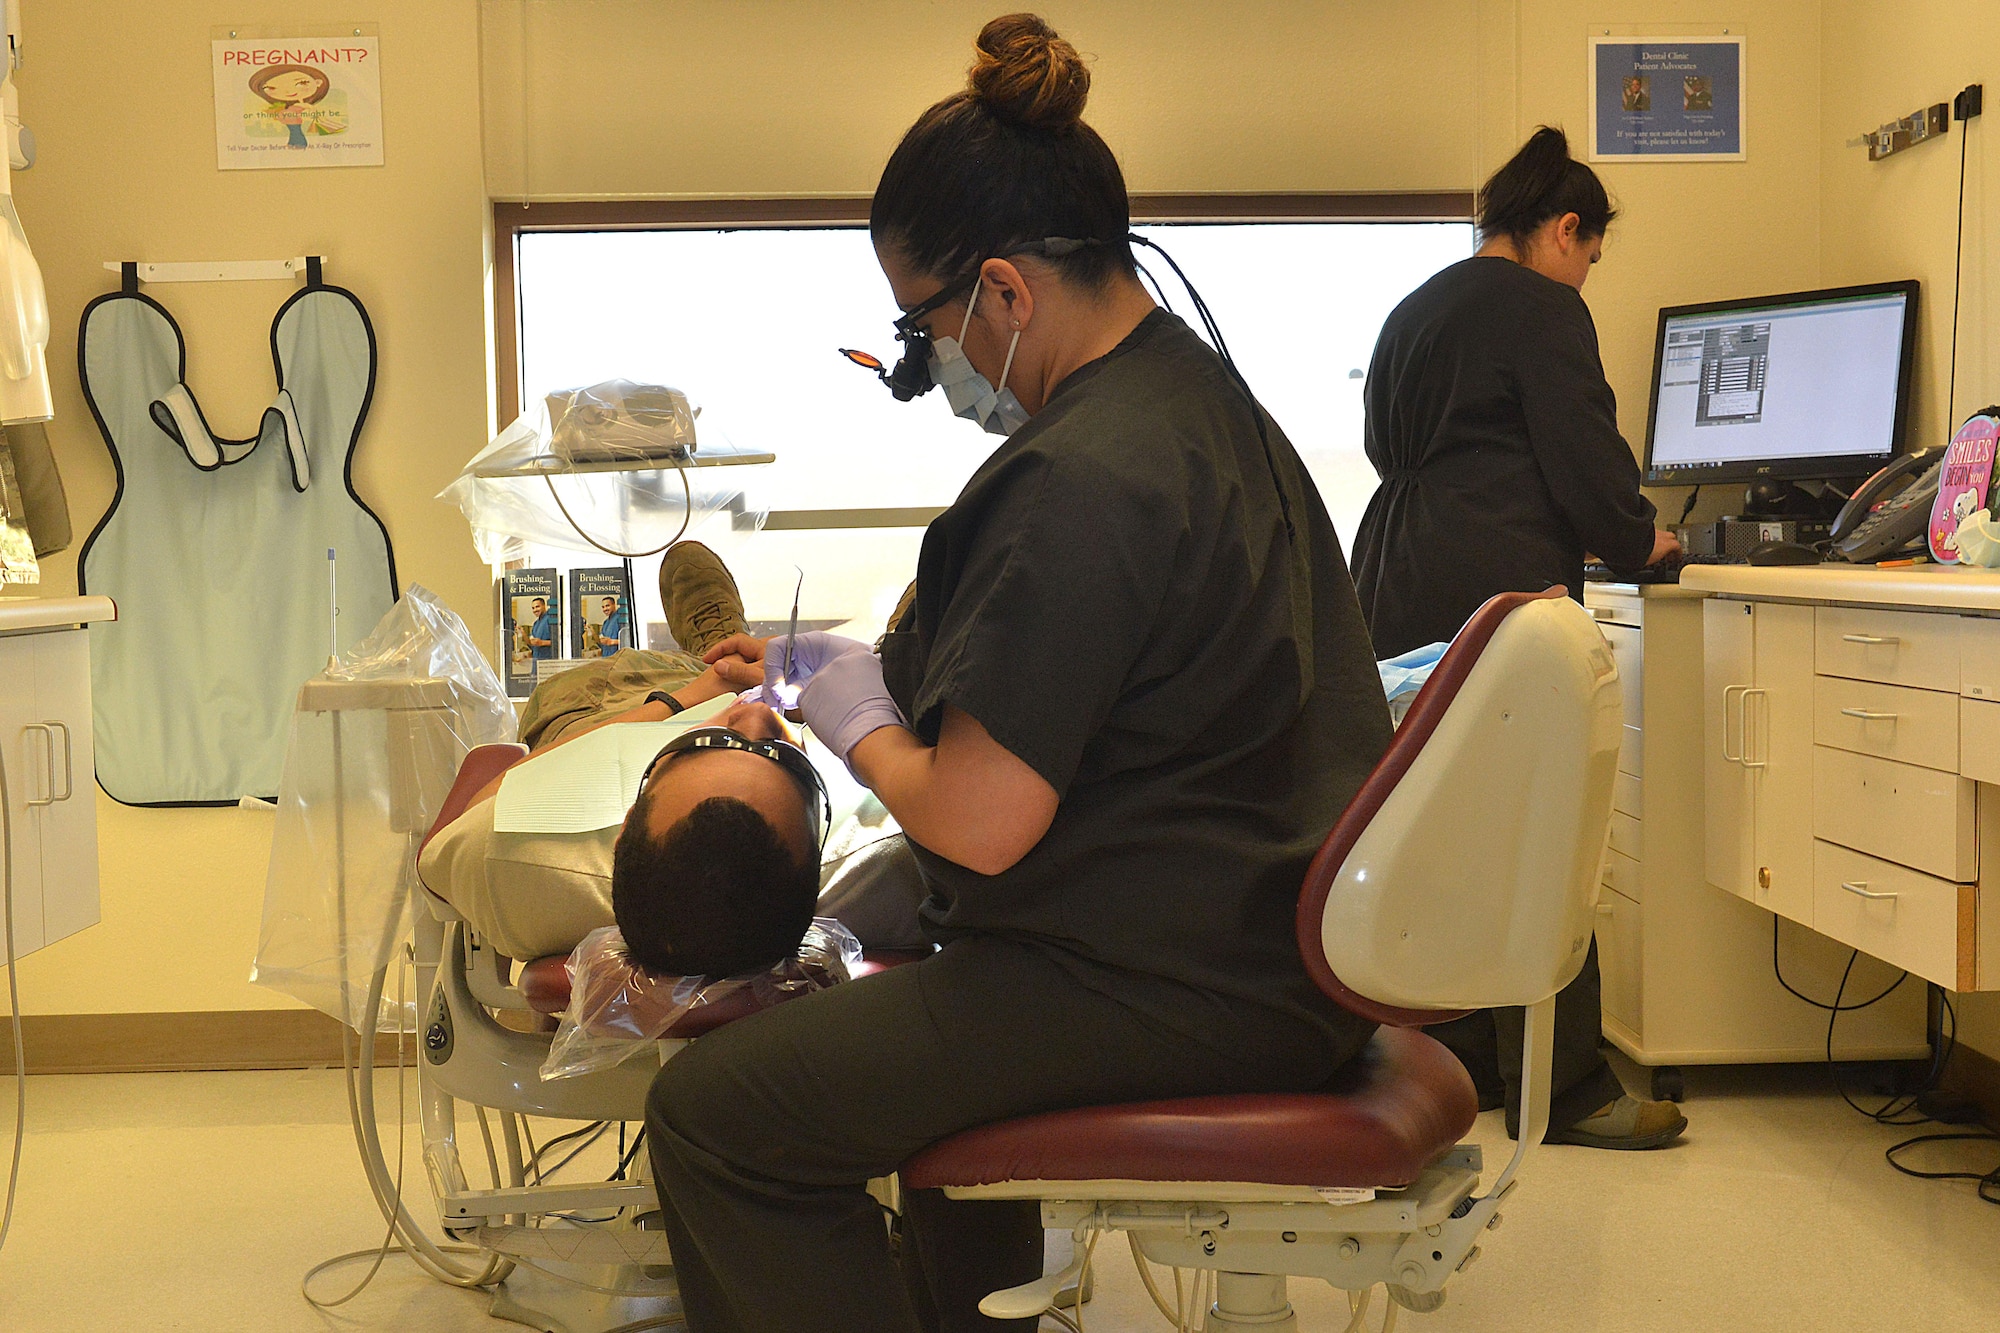 Airmen from the 5th Medical Group dental clinic complete an examination at Minot Air Force Base, N.D., Jan. 10, 2017. The 5th MDG dental clinic is preparing for Children's Dental Health Month, which promotes healthy habits to children. (U.S. Air Force photo/Airman 1st Class Jessica Weissman)